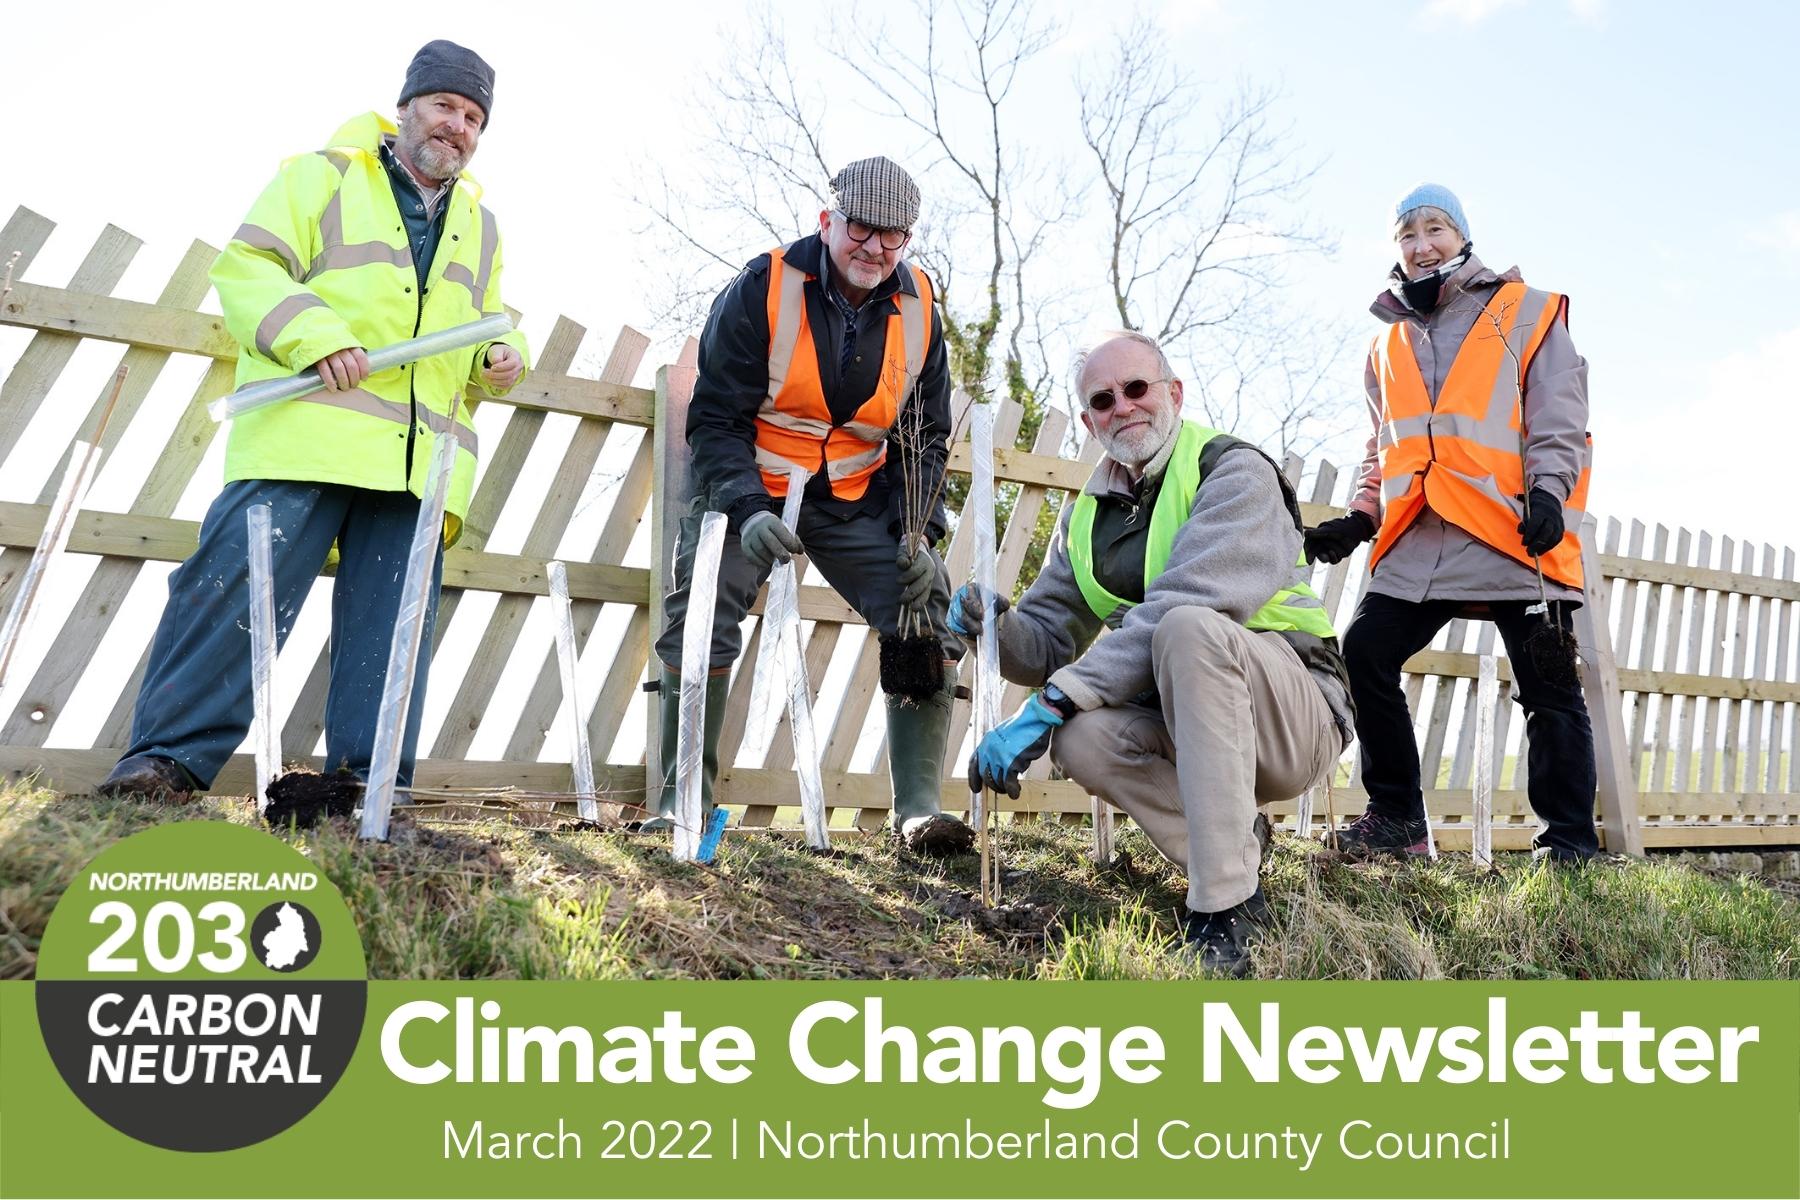 Aln Valley Railway volunteers planting trees with text: Climate Change Newsletter, March 2022, Northumberland County Council